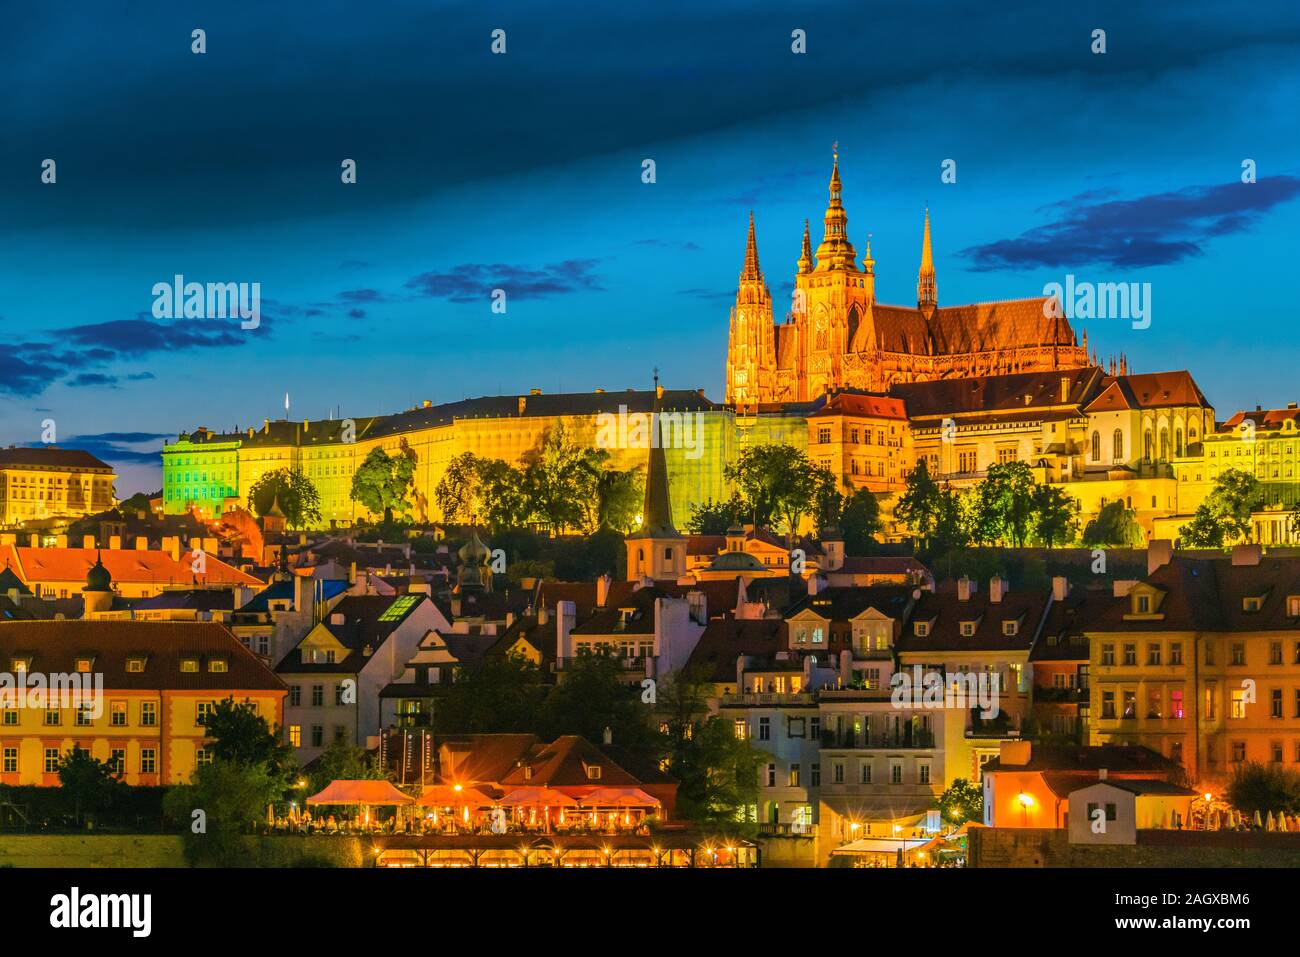 View of Hradcany district in Prague with St. Vitus Cathedral and Prague Castle after sunset. Czech Republic Stock Photo